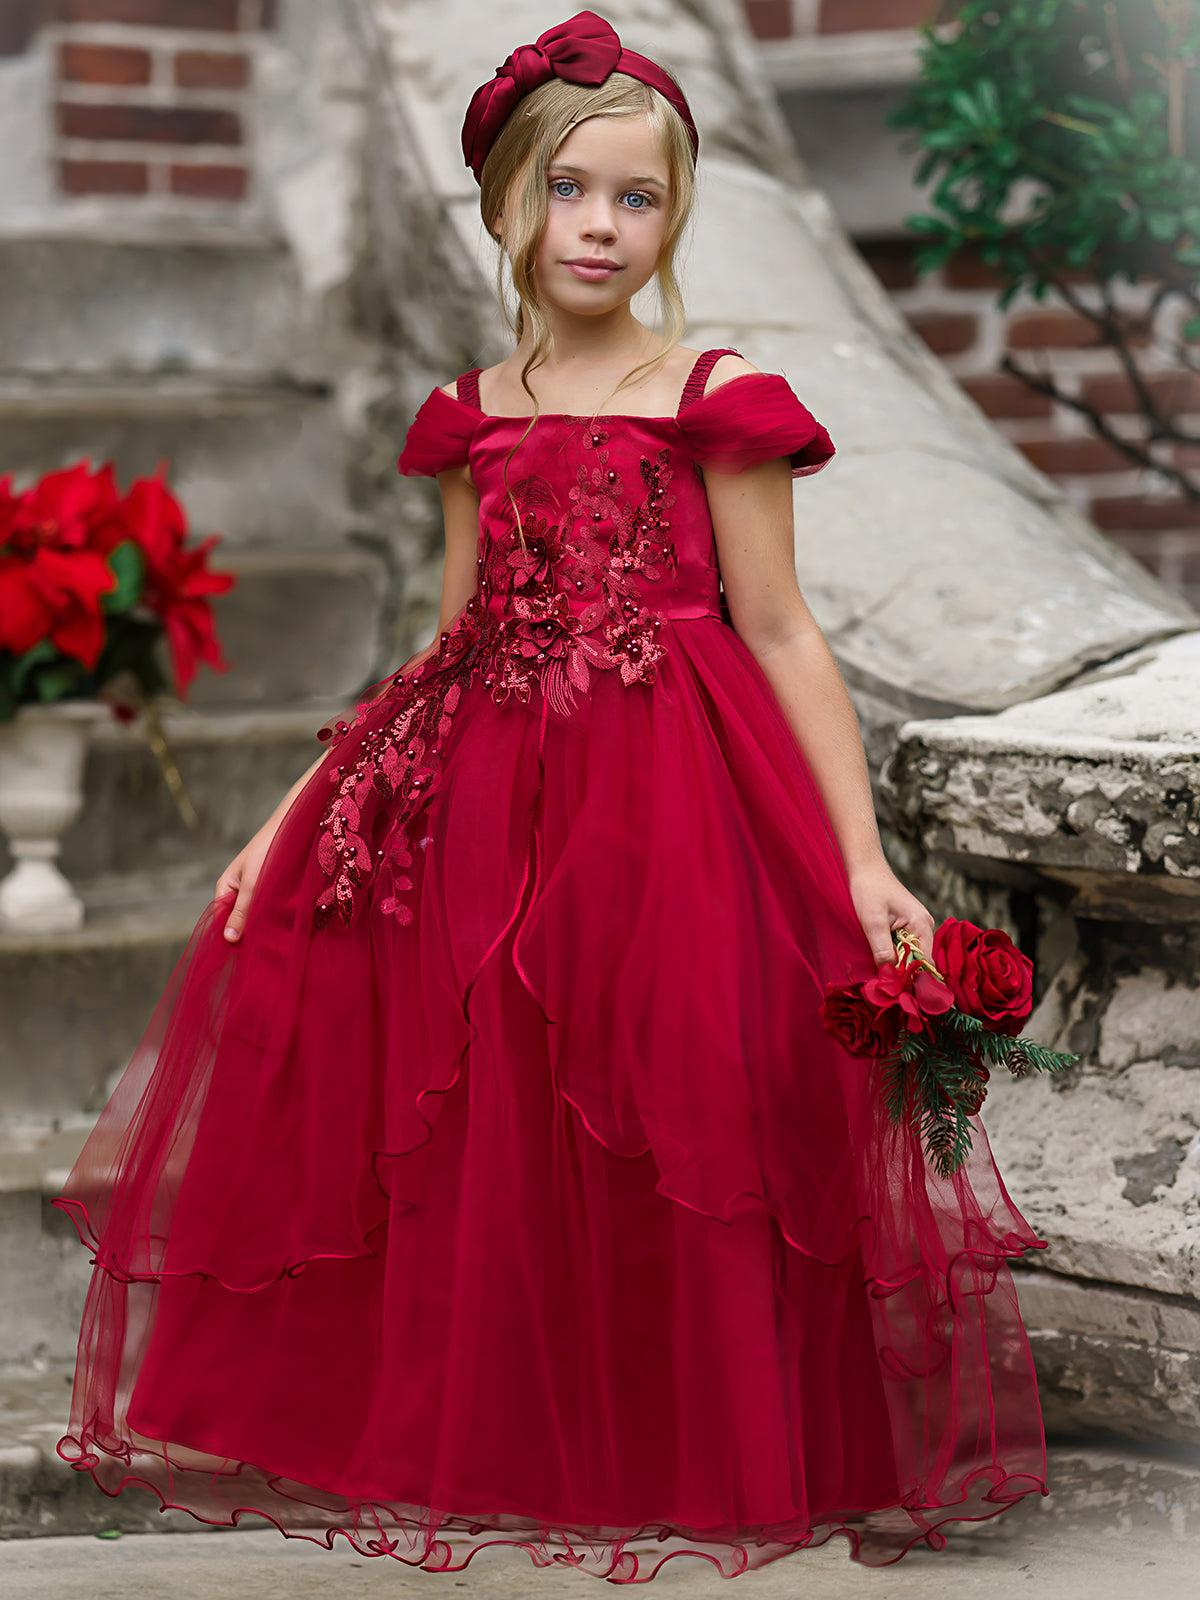 Girls Winter Formal Dress | Tulle Holiday Gown | Mia Belle Girls